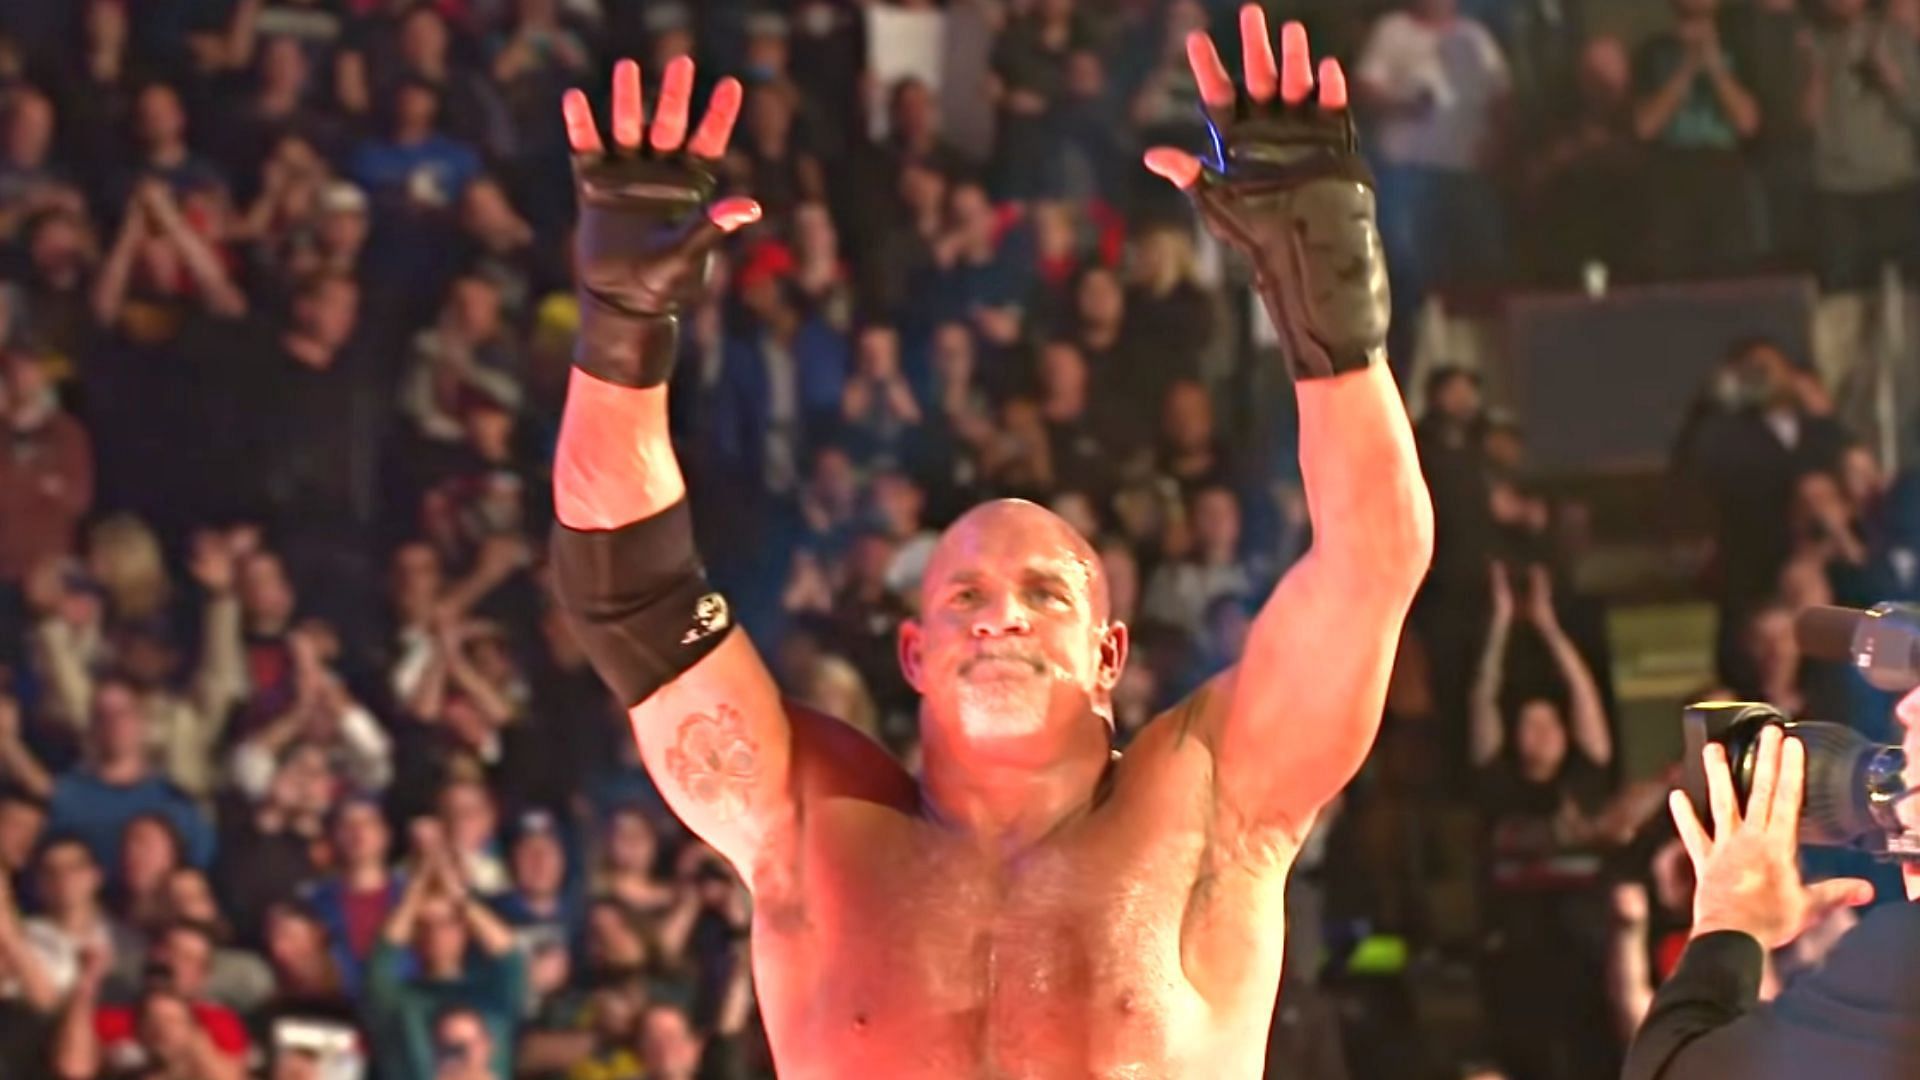 Bill Goldberg has not appeared for WWE since his win over Bobby Lashley at Crown Jewel.